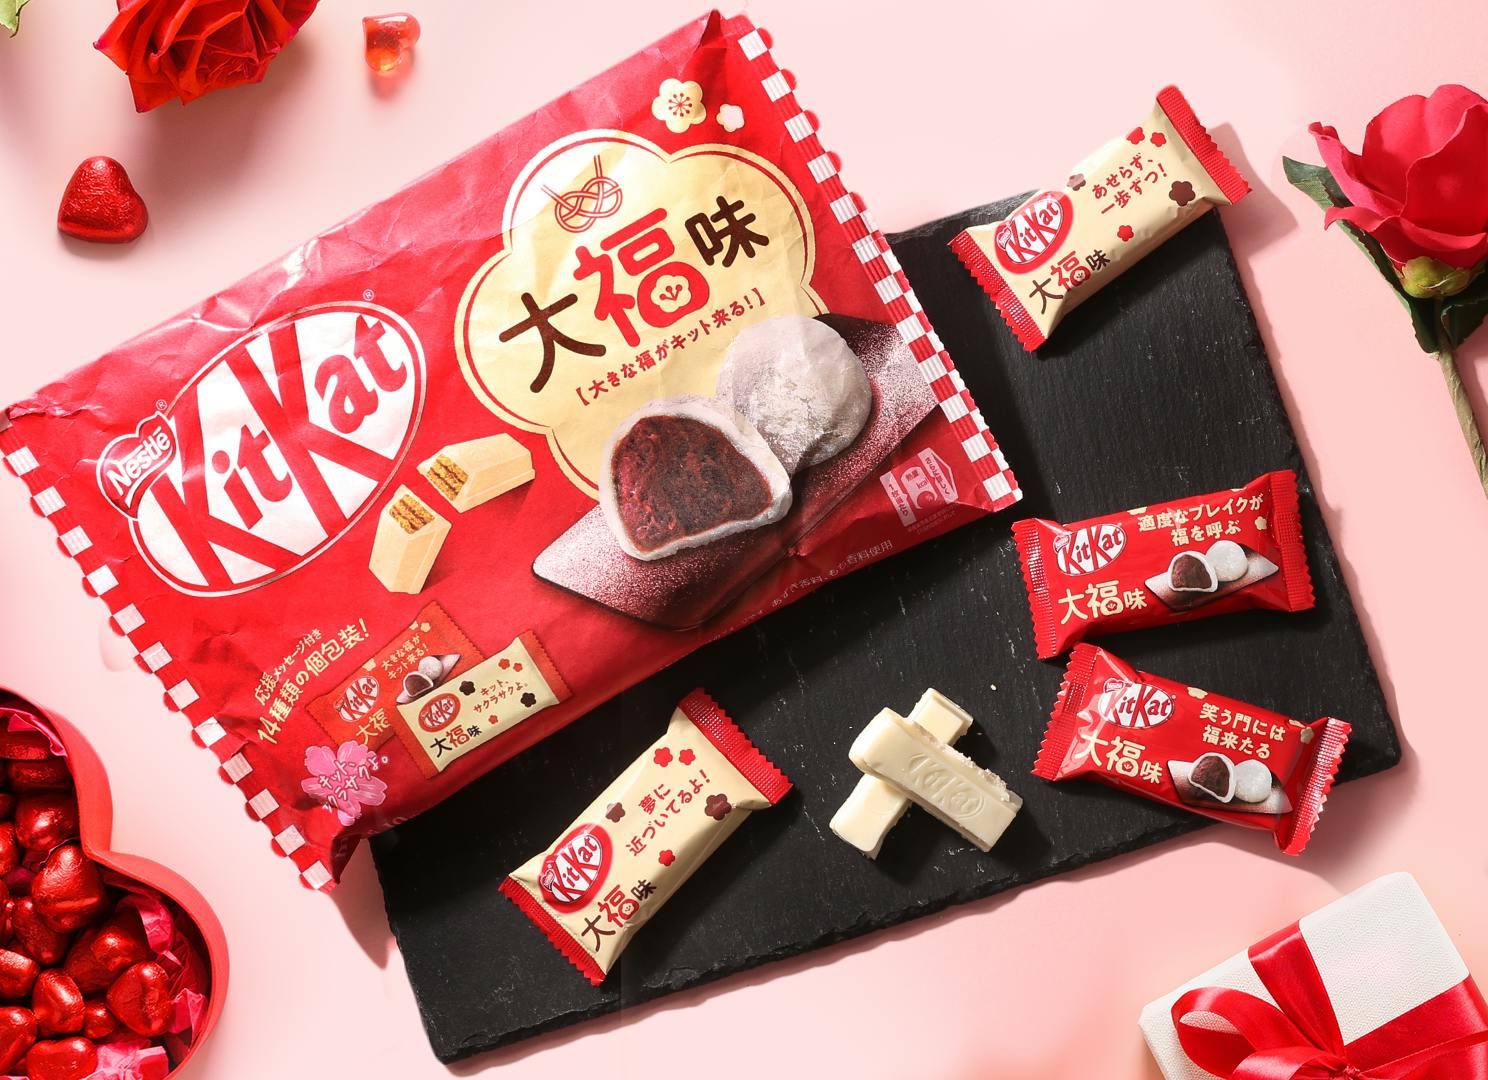 KitKat Japan Lucky Daifuku on a plate with Valentine's Day roses and hearts.